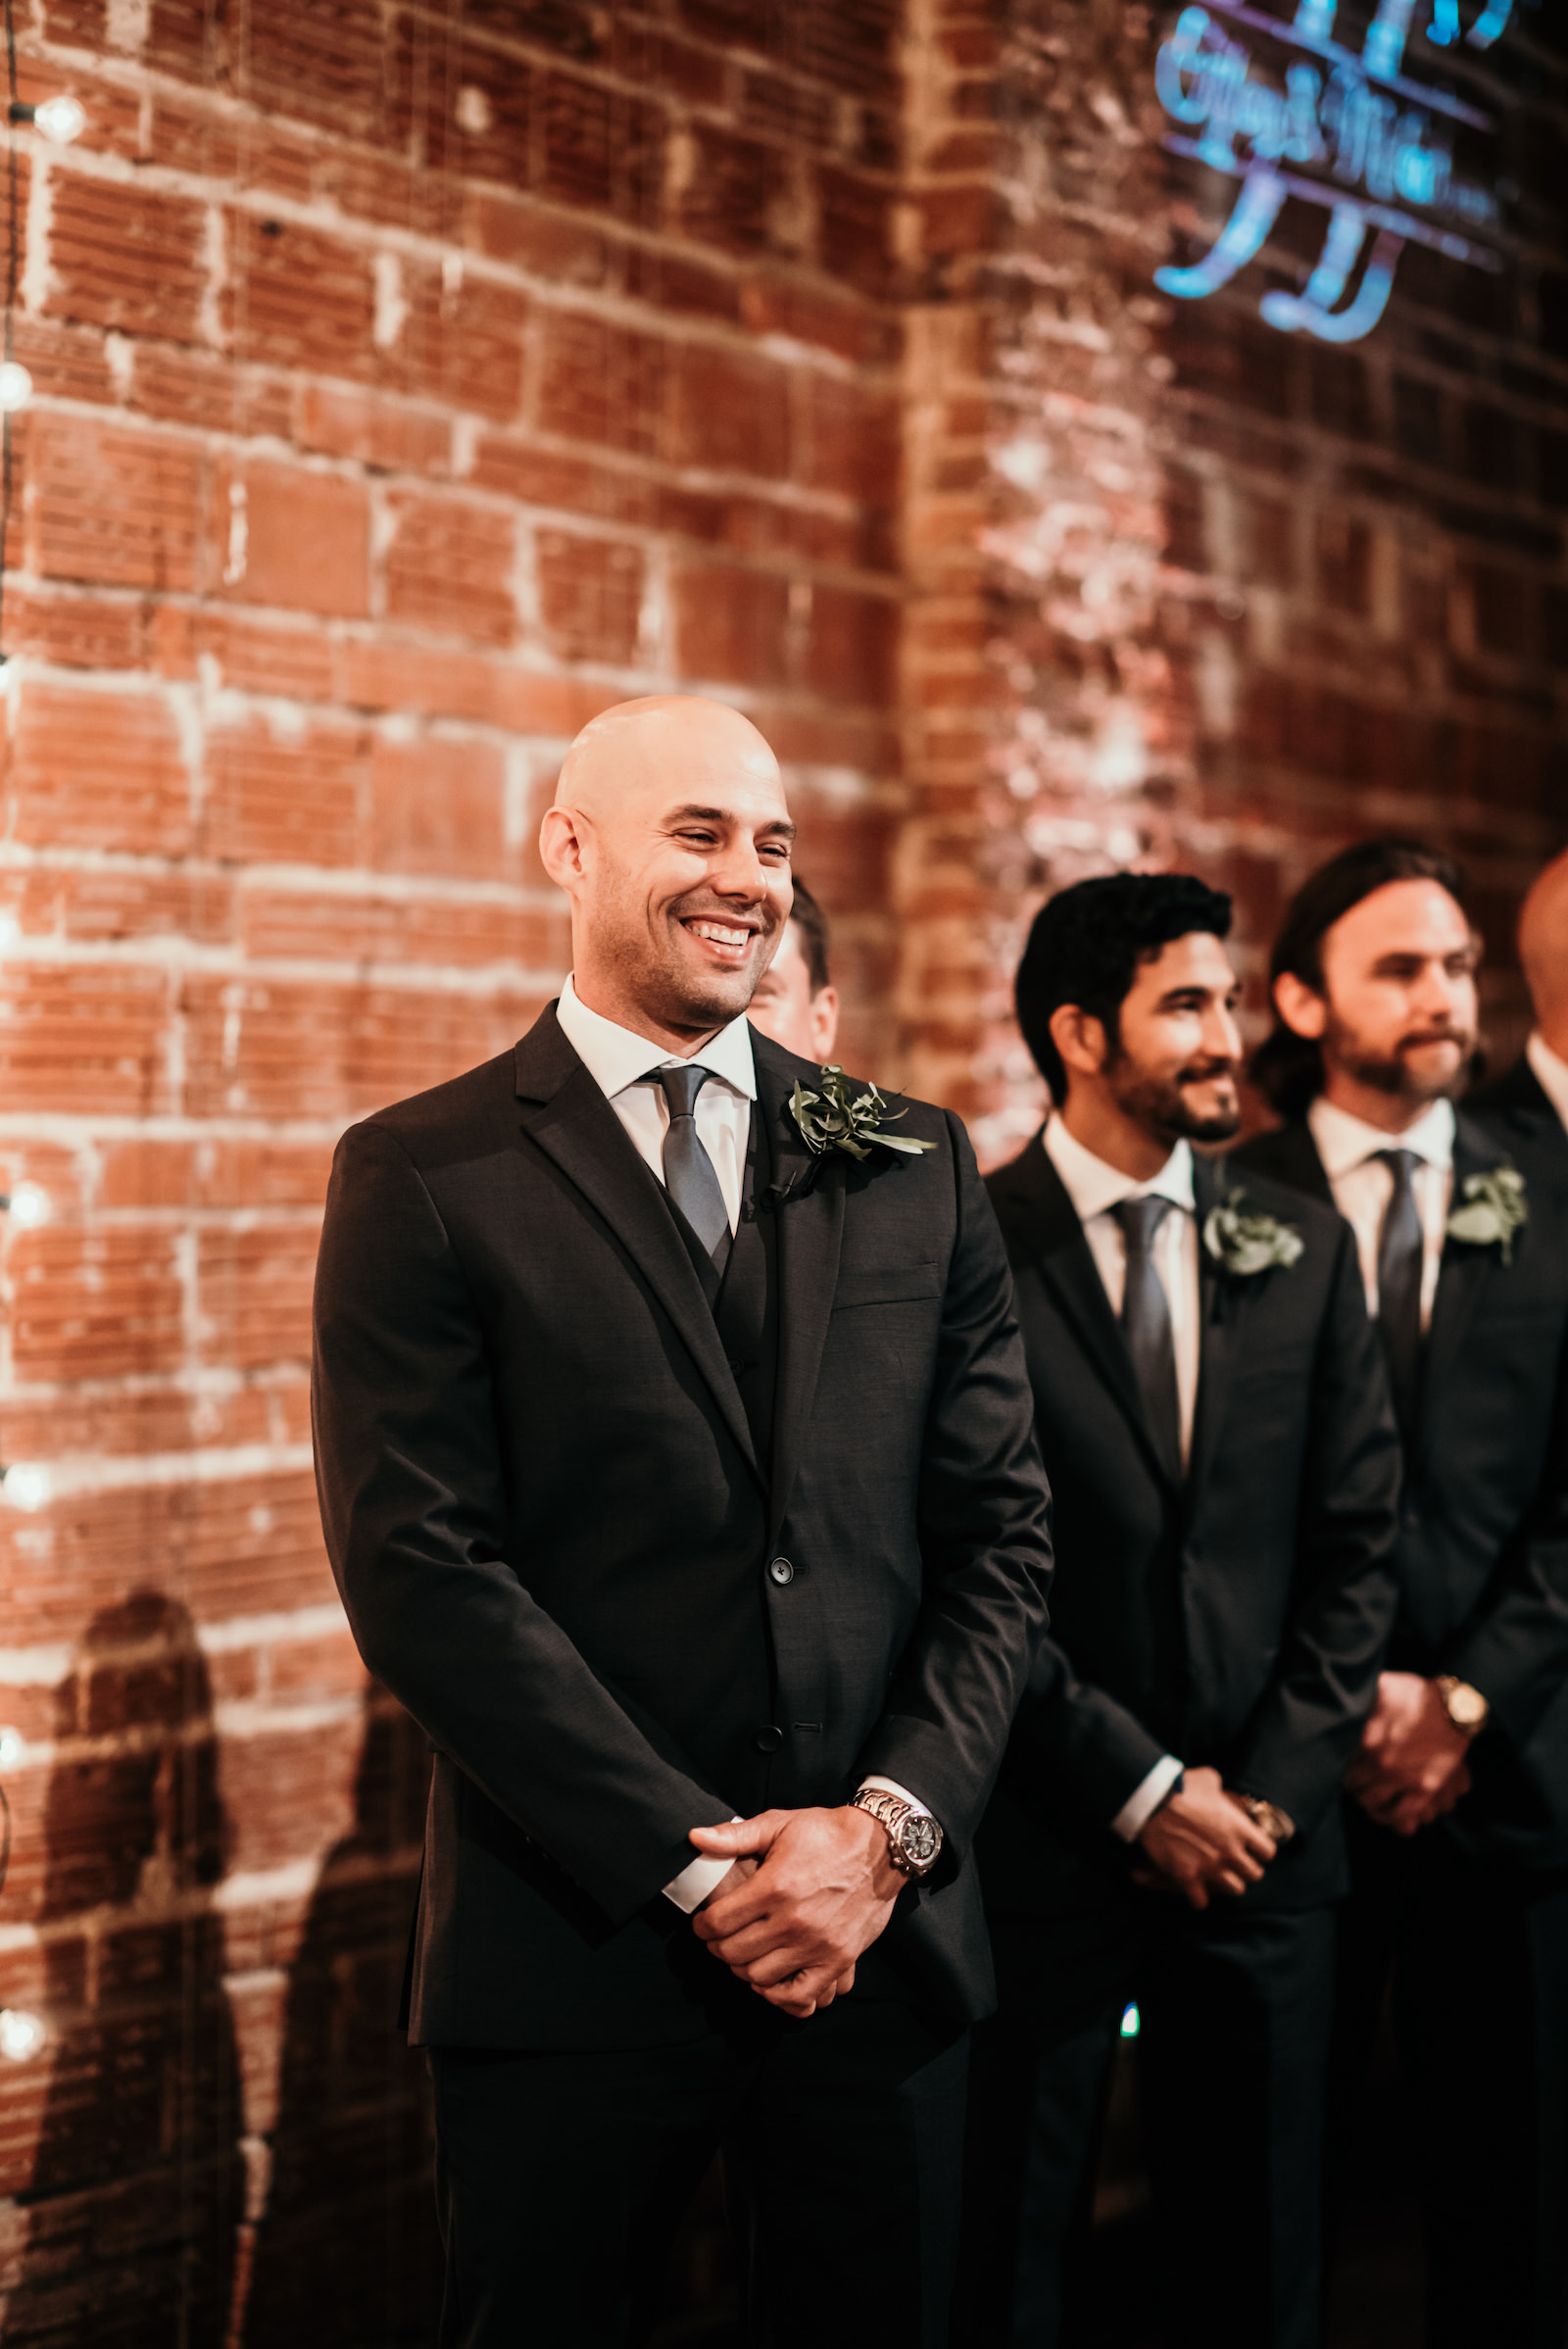 Tampa Bay Groom Smiles During Wedding Ceremony in front of Exposed Red Brick Wall | Unique Florida Industrial Wedding Venue NOVA 535